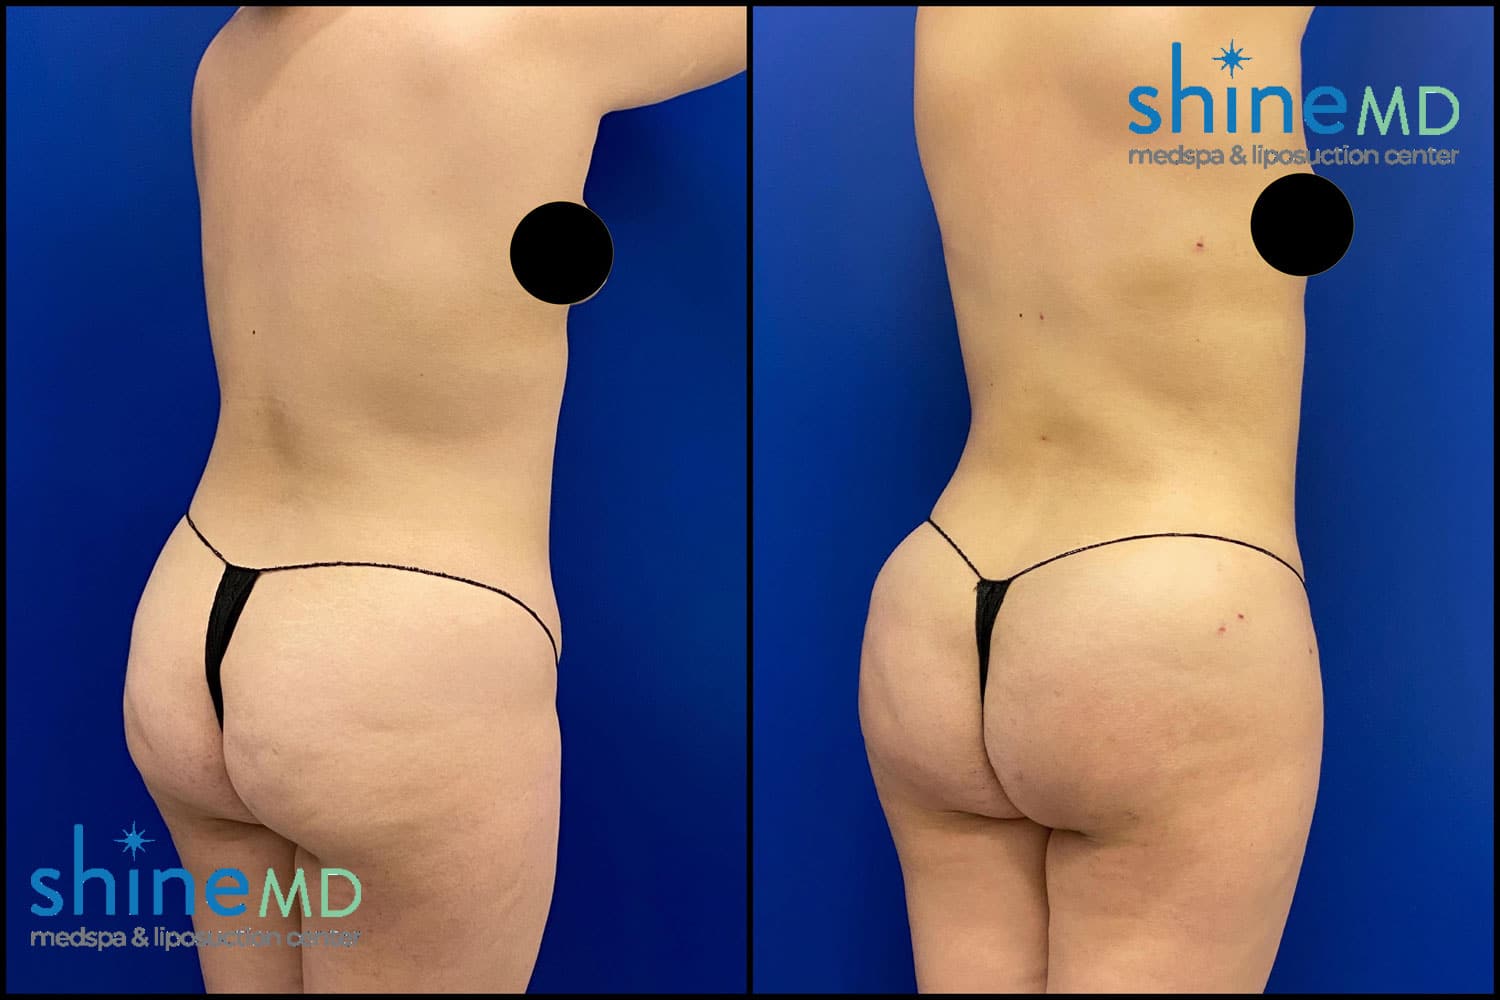 Body Sculpting Liposuction Before & After Photos ShineMD